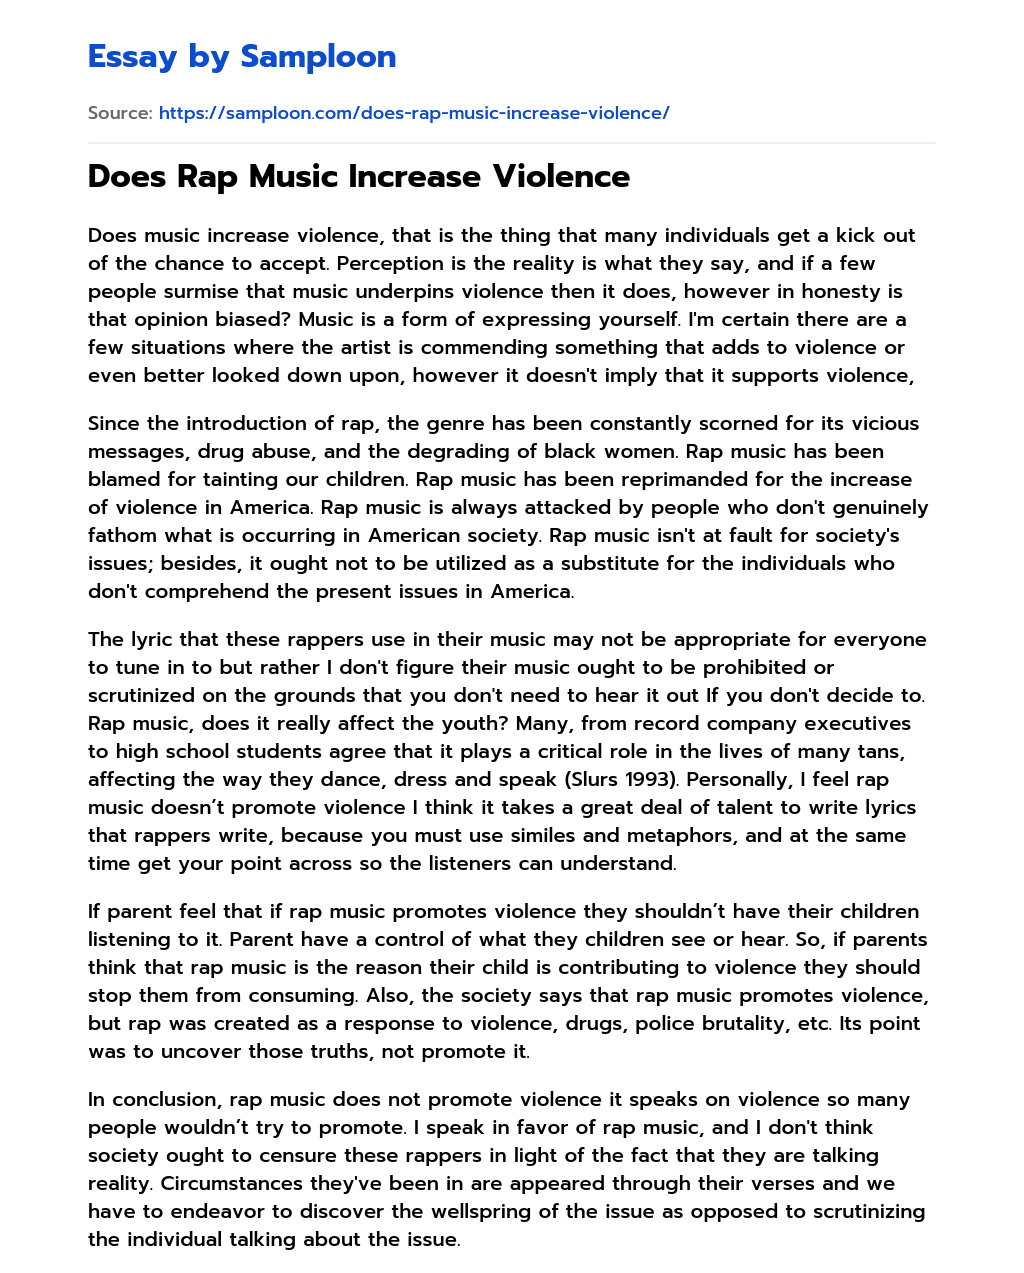 Does Rap Music Increase Violence essay